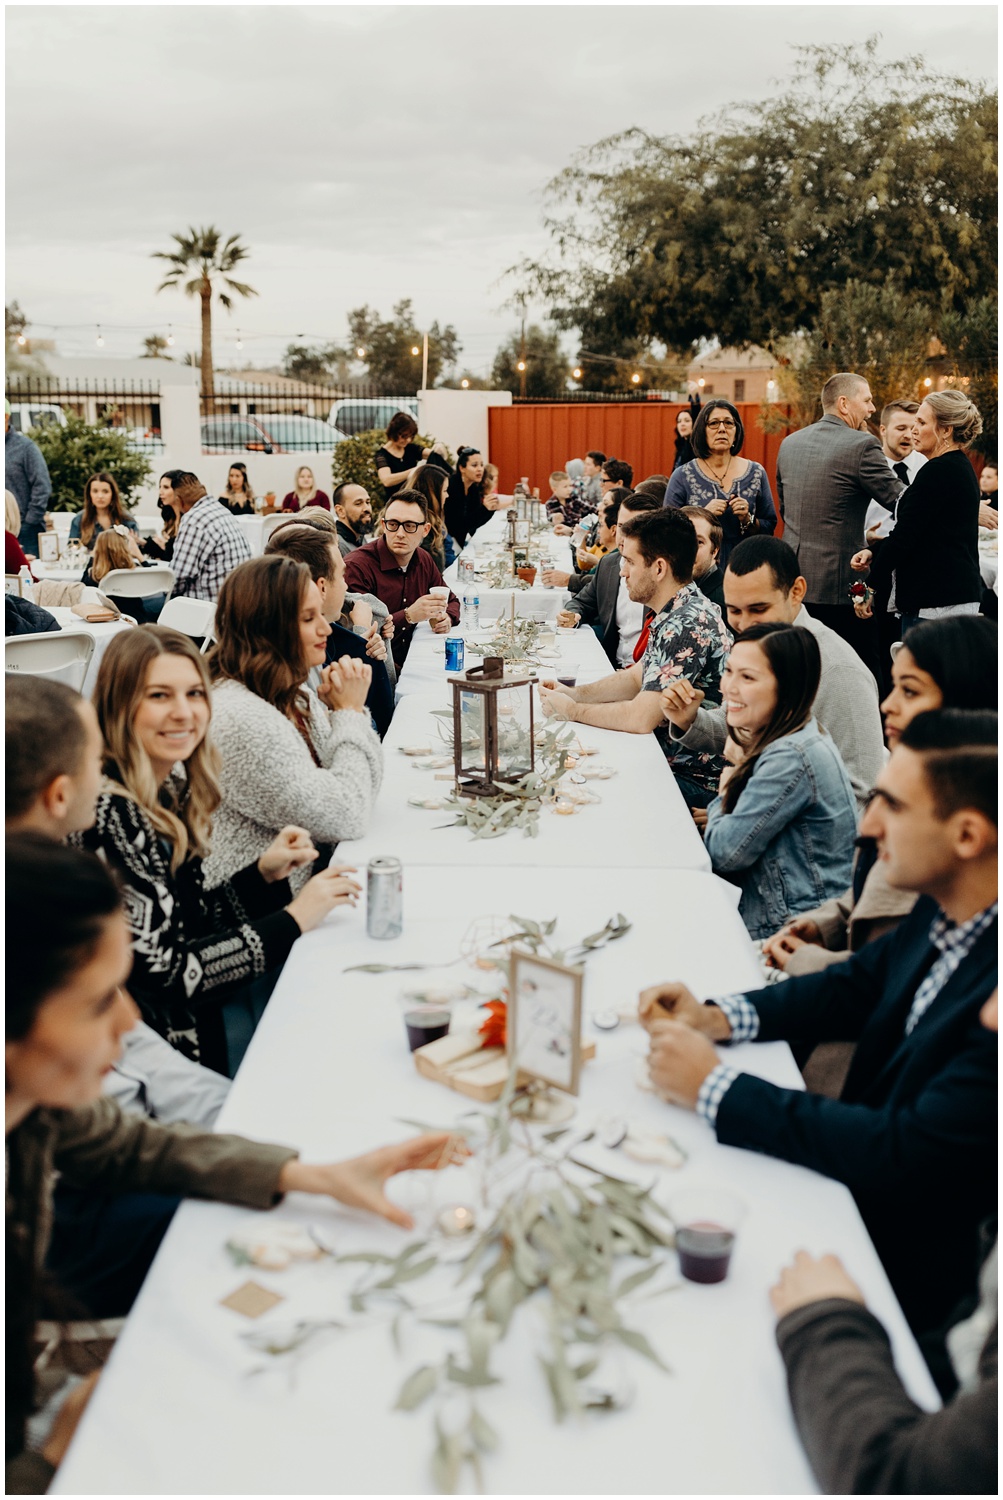 Guests gather together during the reception to share a meal.